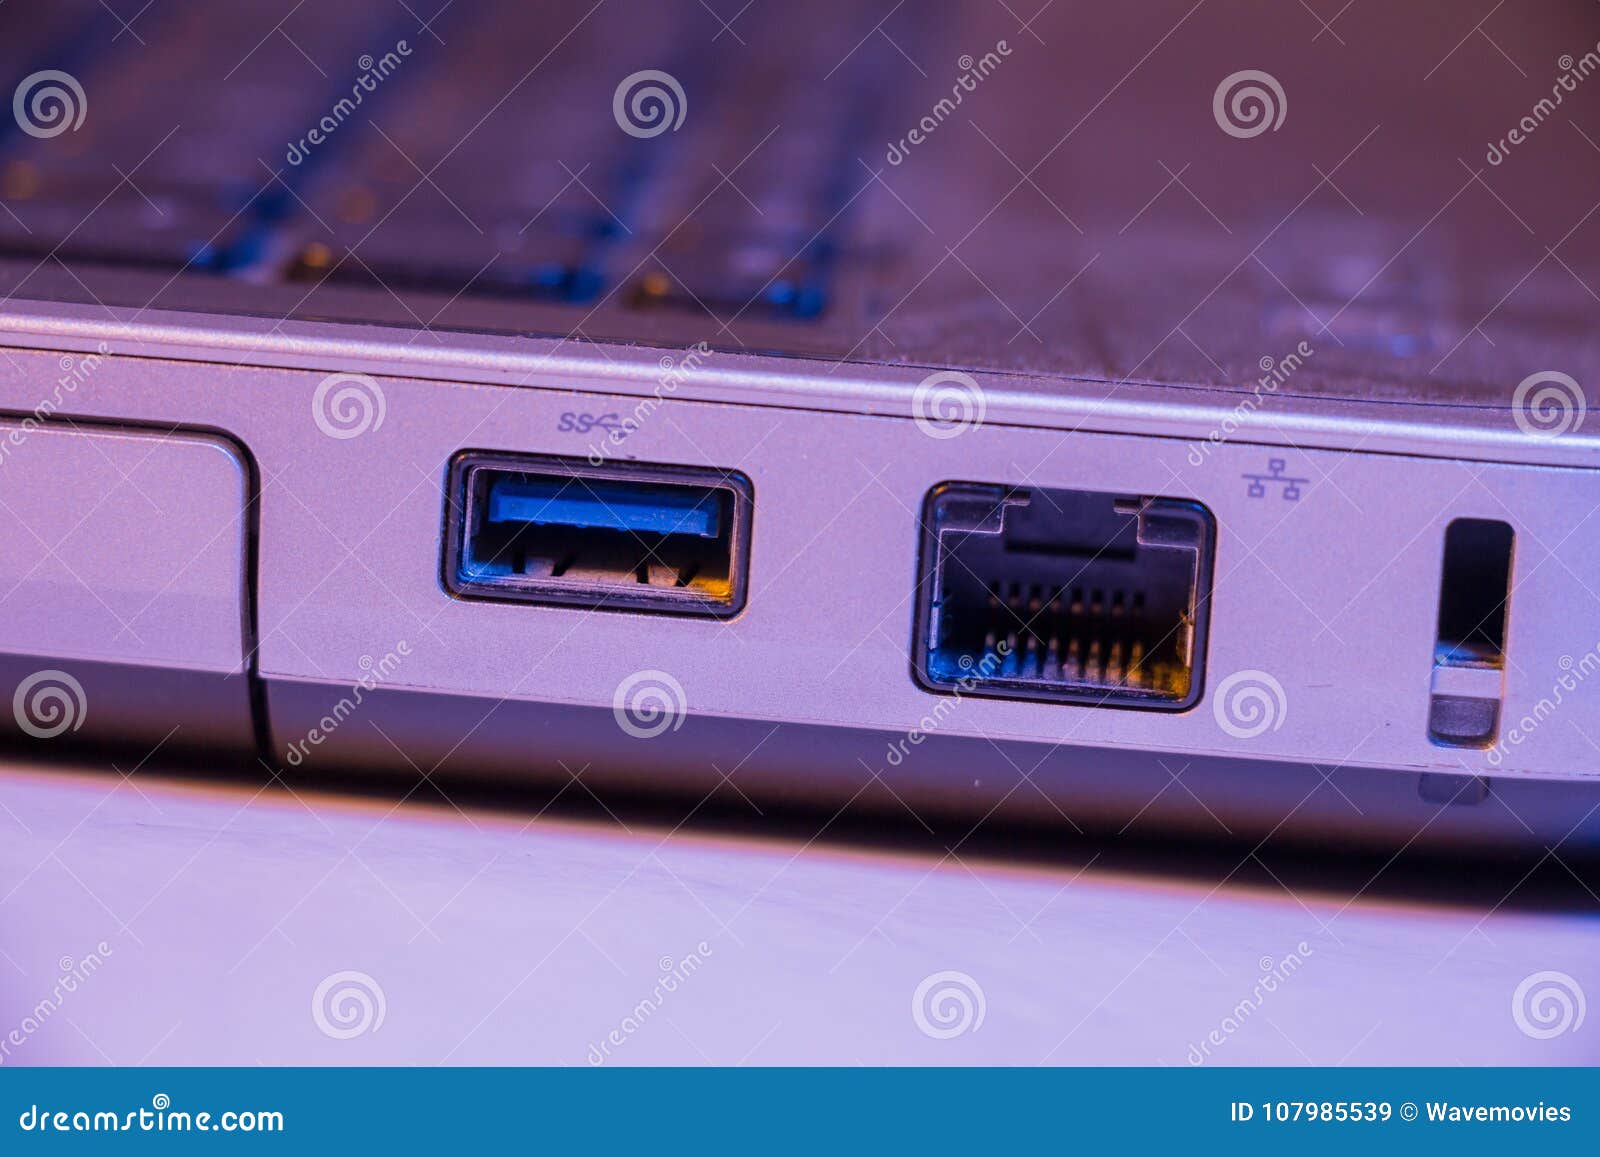 closeup of ethernet cable and usb ports in a laptop